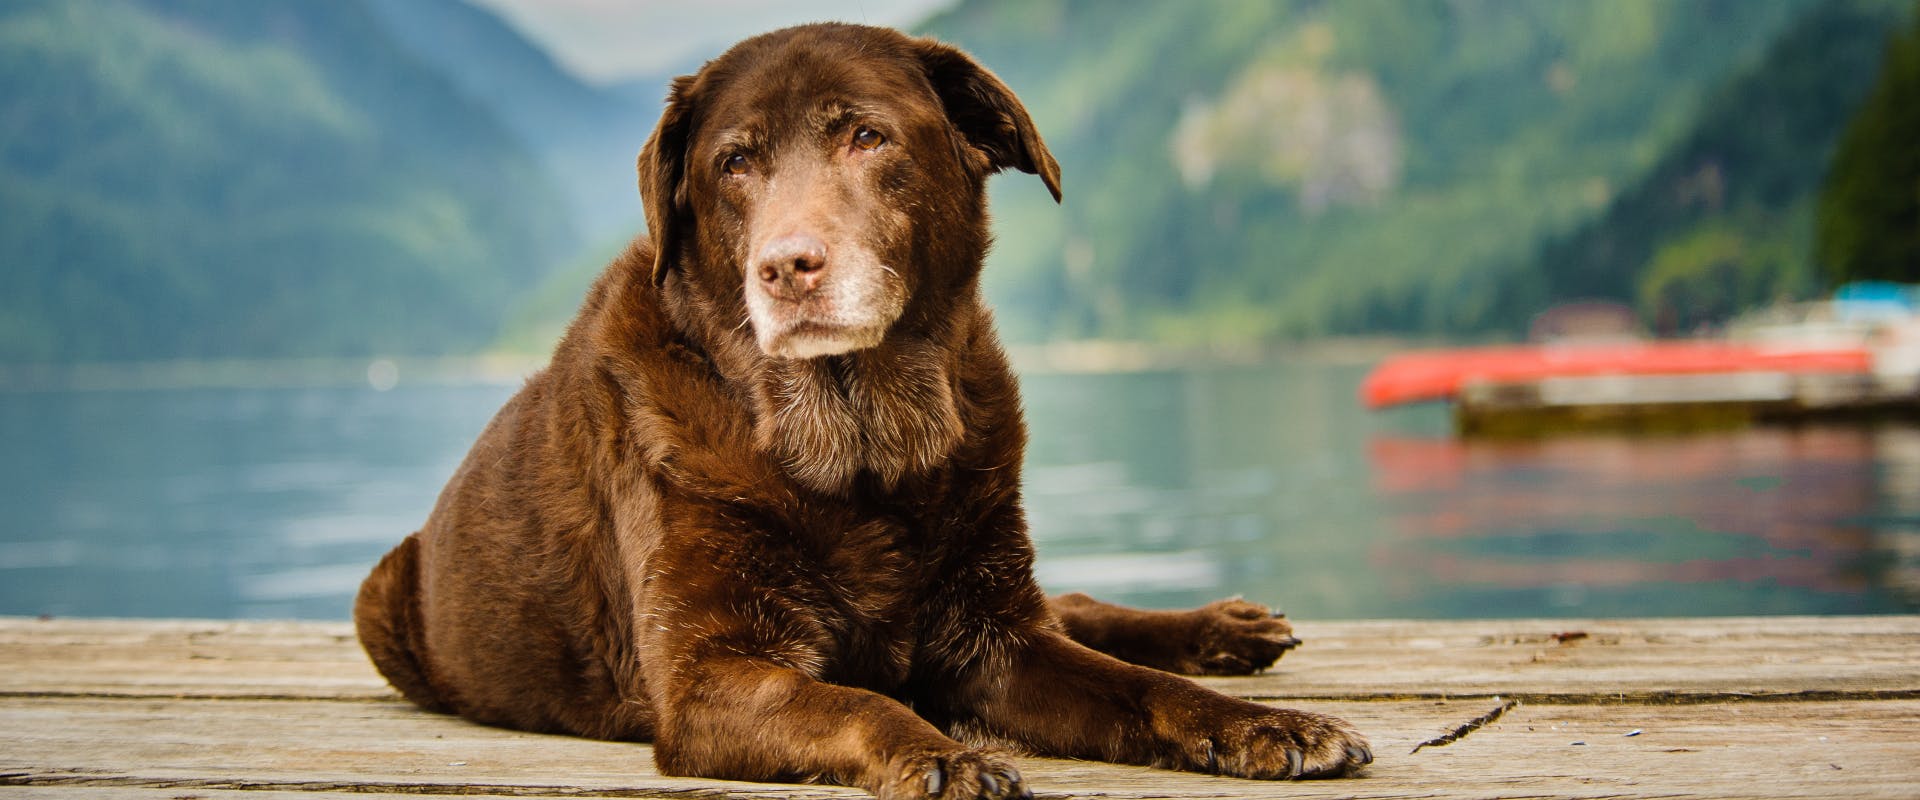 senior dog sitting on a wooden deck with a lake and valley in the background